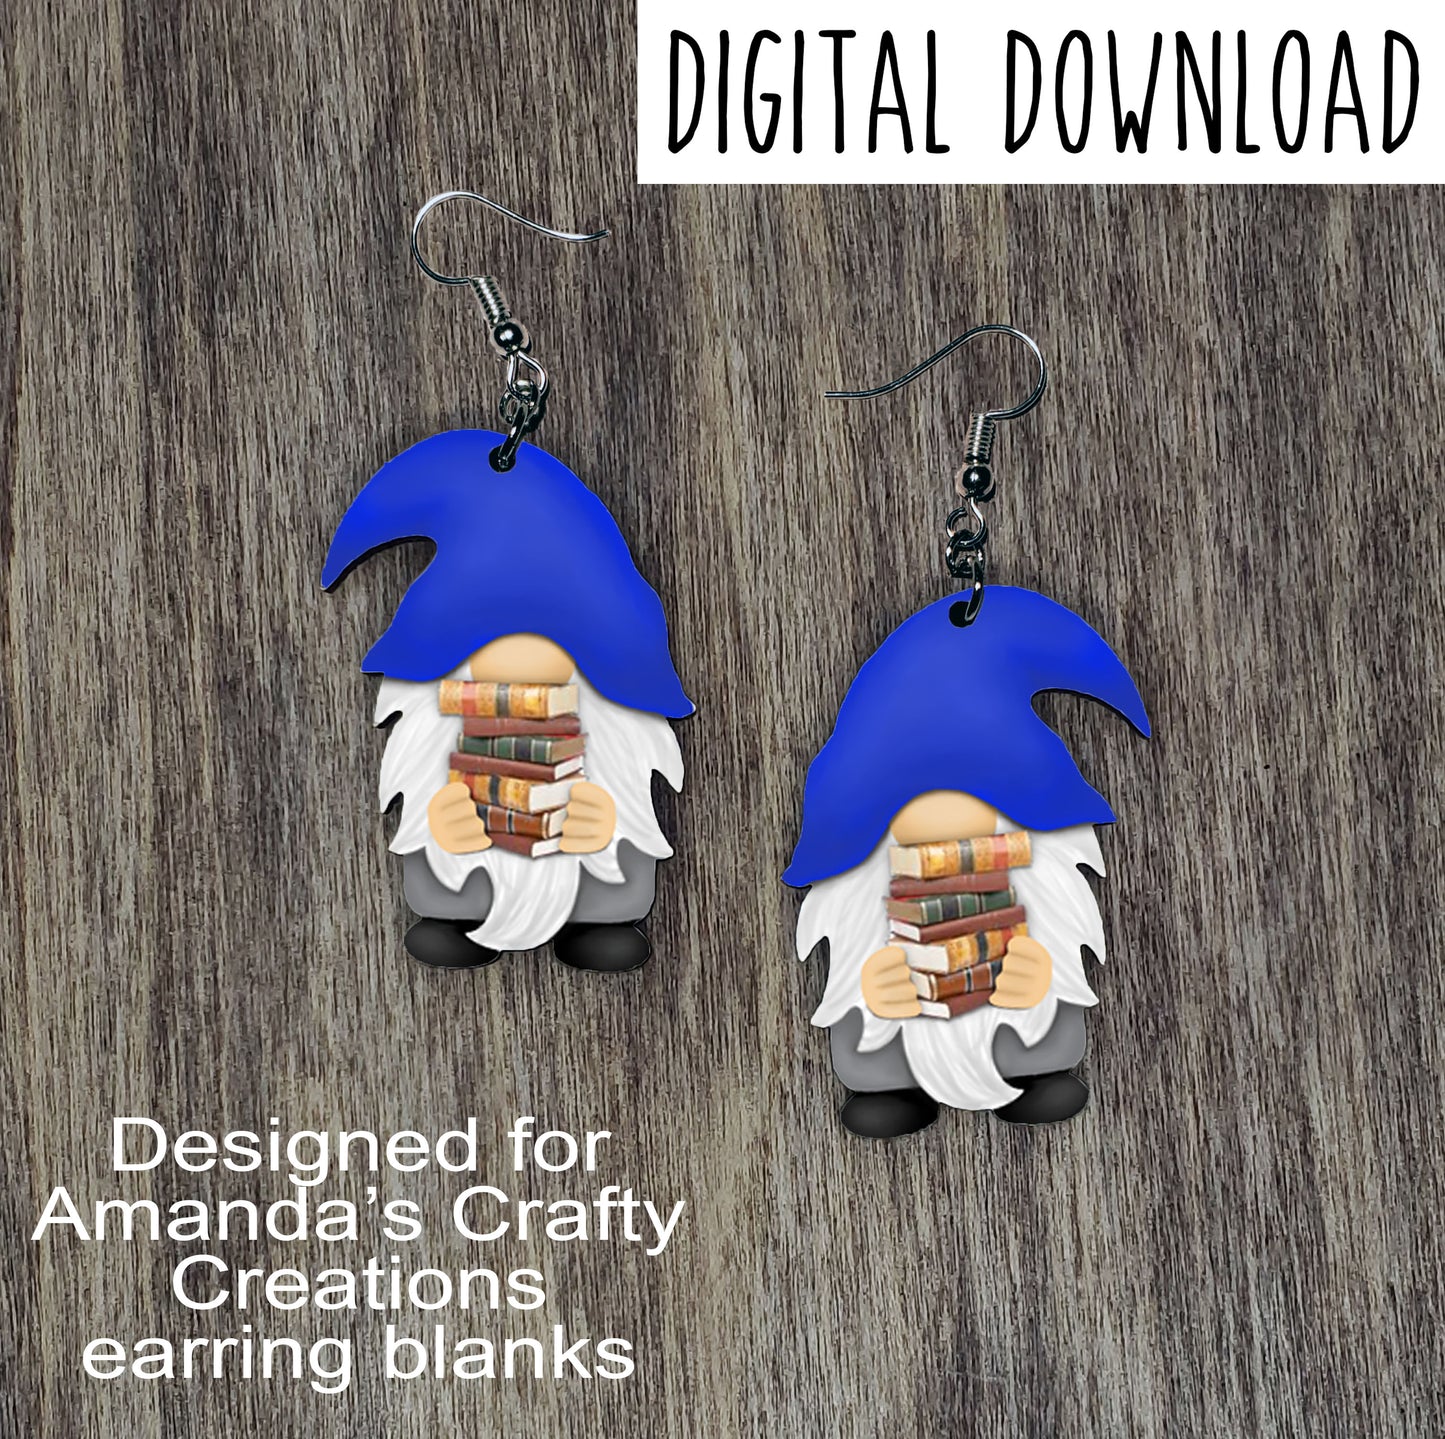 Book Gnome Earring Sublimation Design, Hand drawn Gnome Sublimation earring design, digital download, JPG, PNG